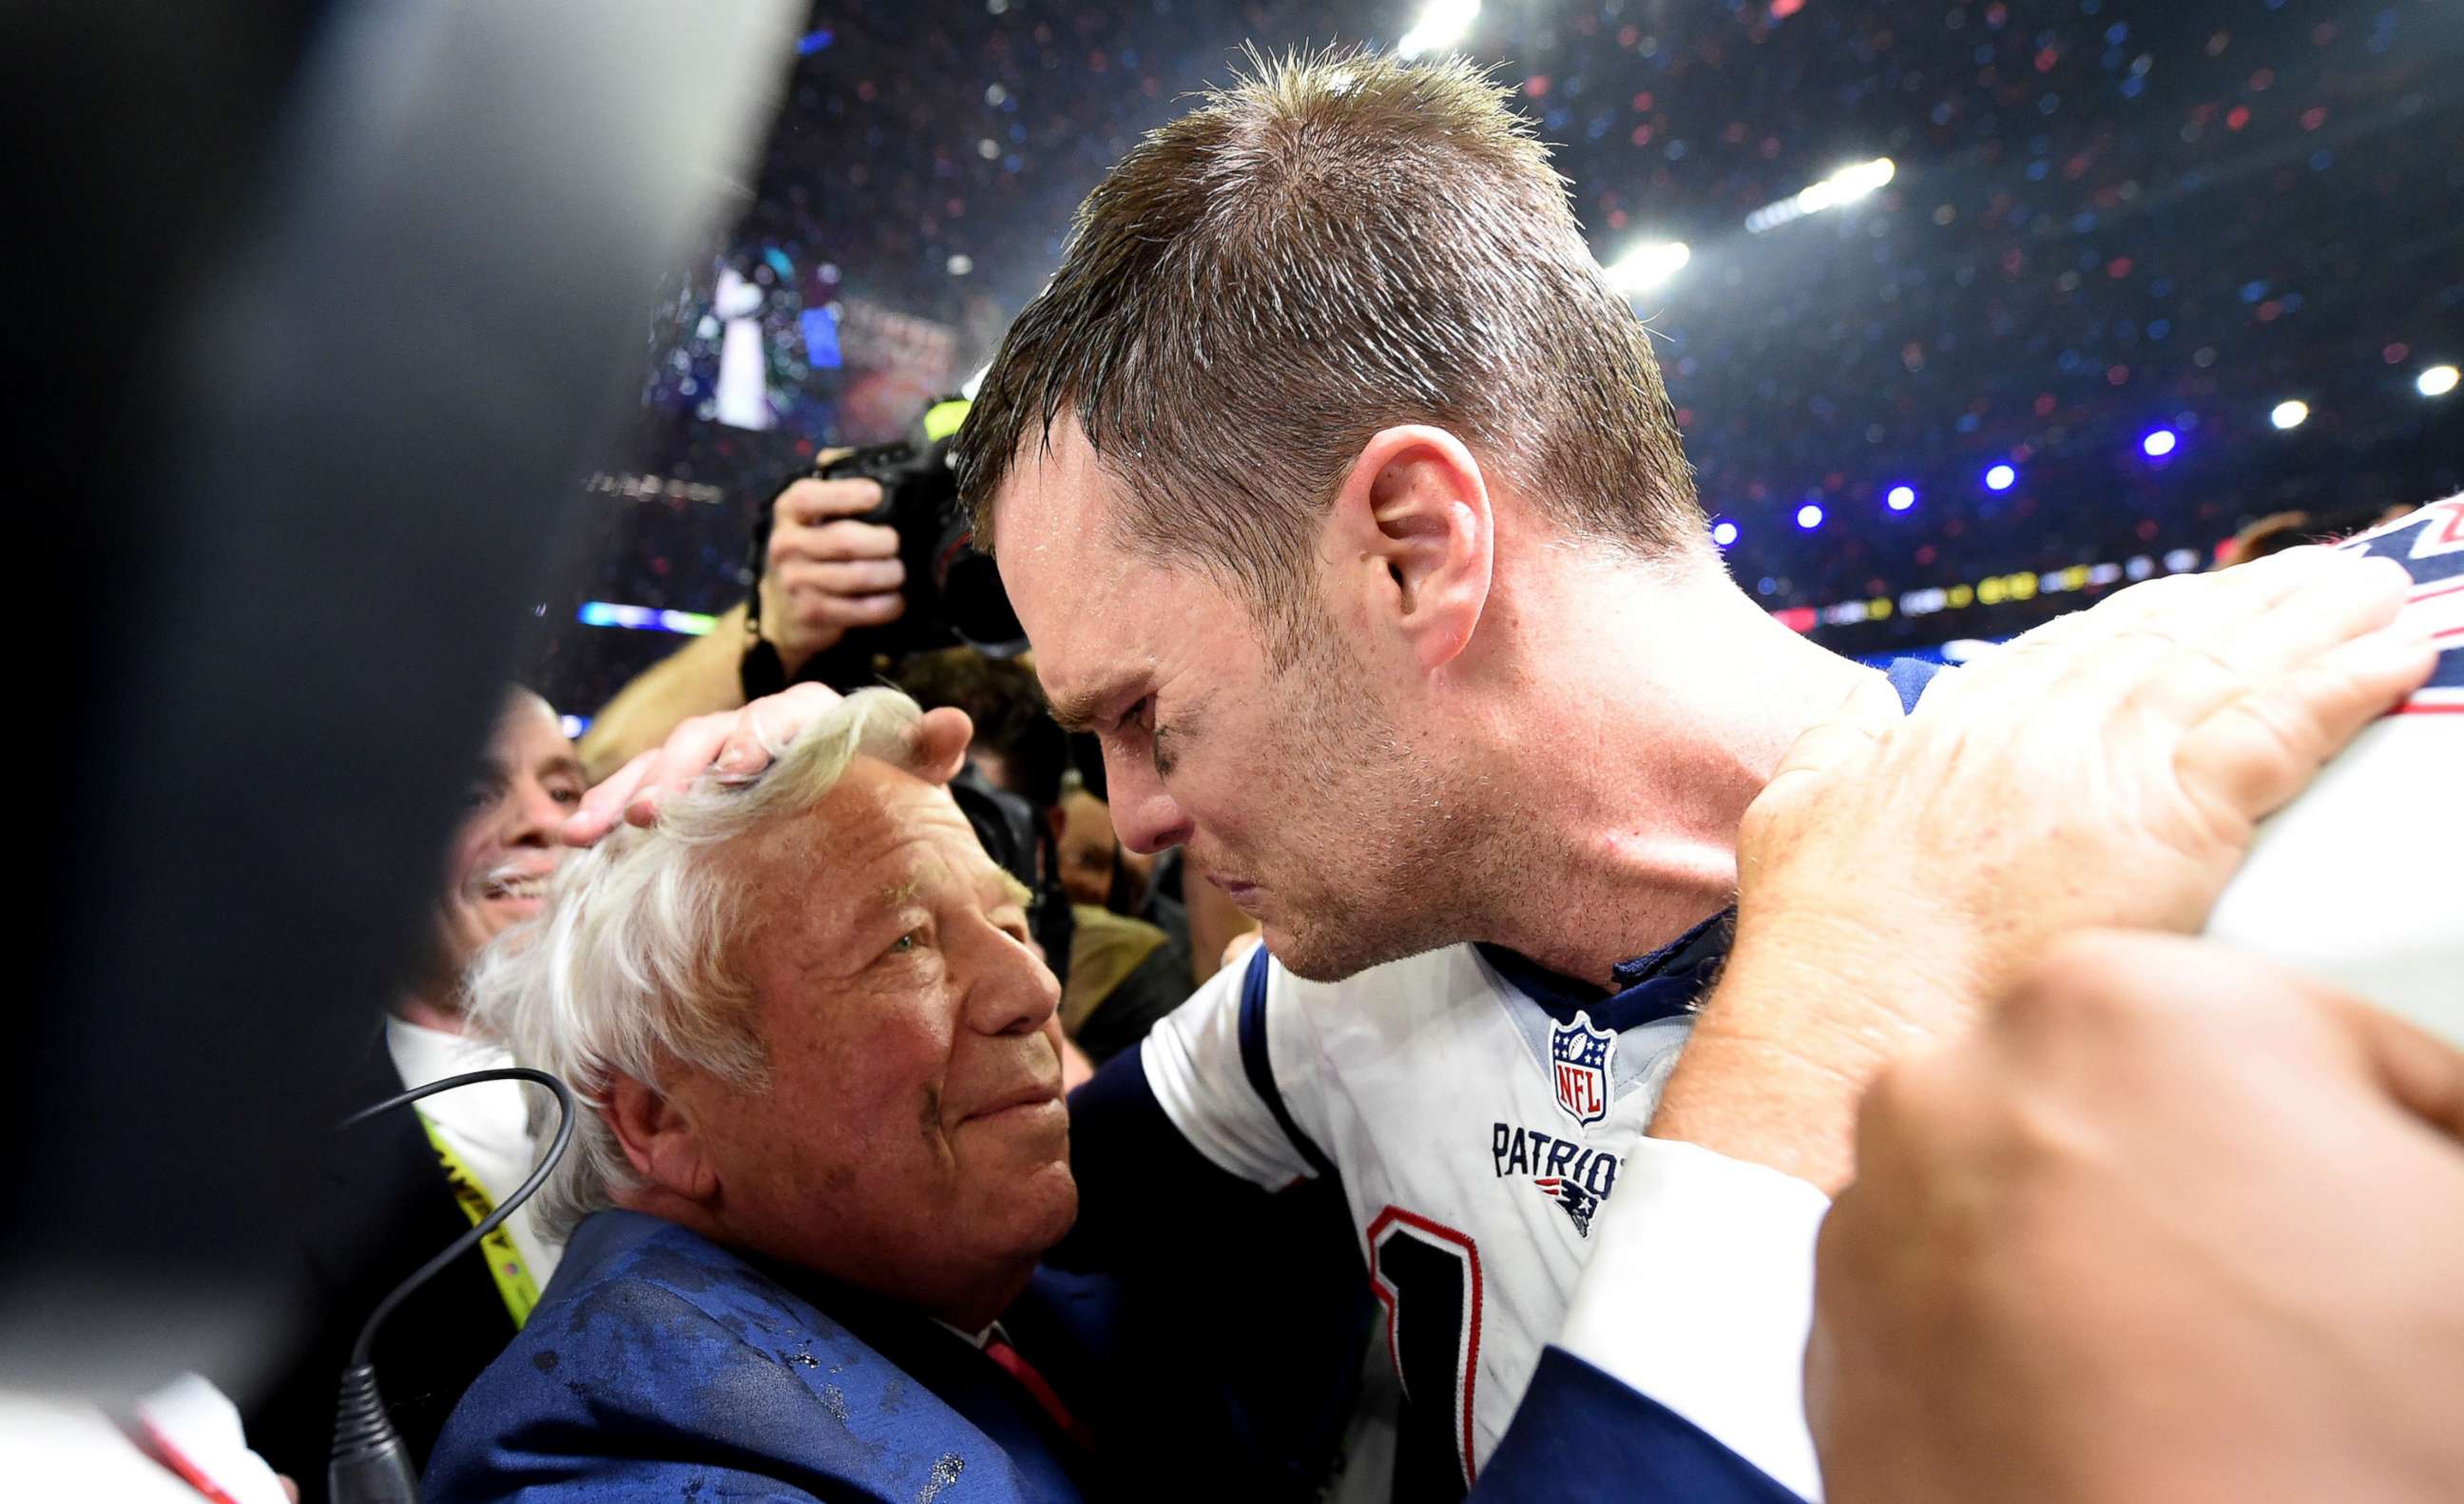 PHOTO: New England Patriots owner Robert Kraft and Tom Brady of the New England Patriots celebrate after defeating the Atlanta Falcons during Super Bowl 51 at NRG Stadium, Feb. 5, 2017, in Houston.